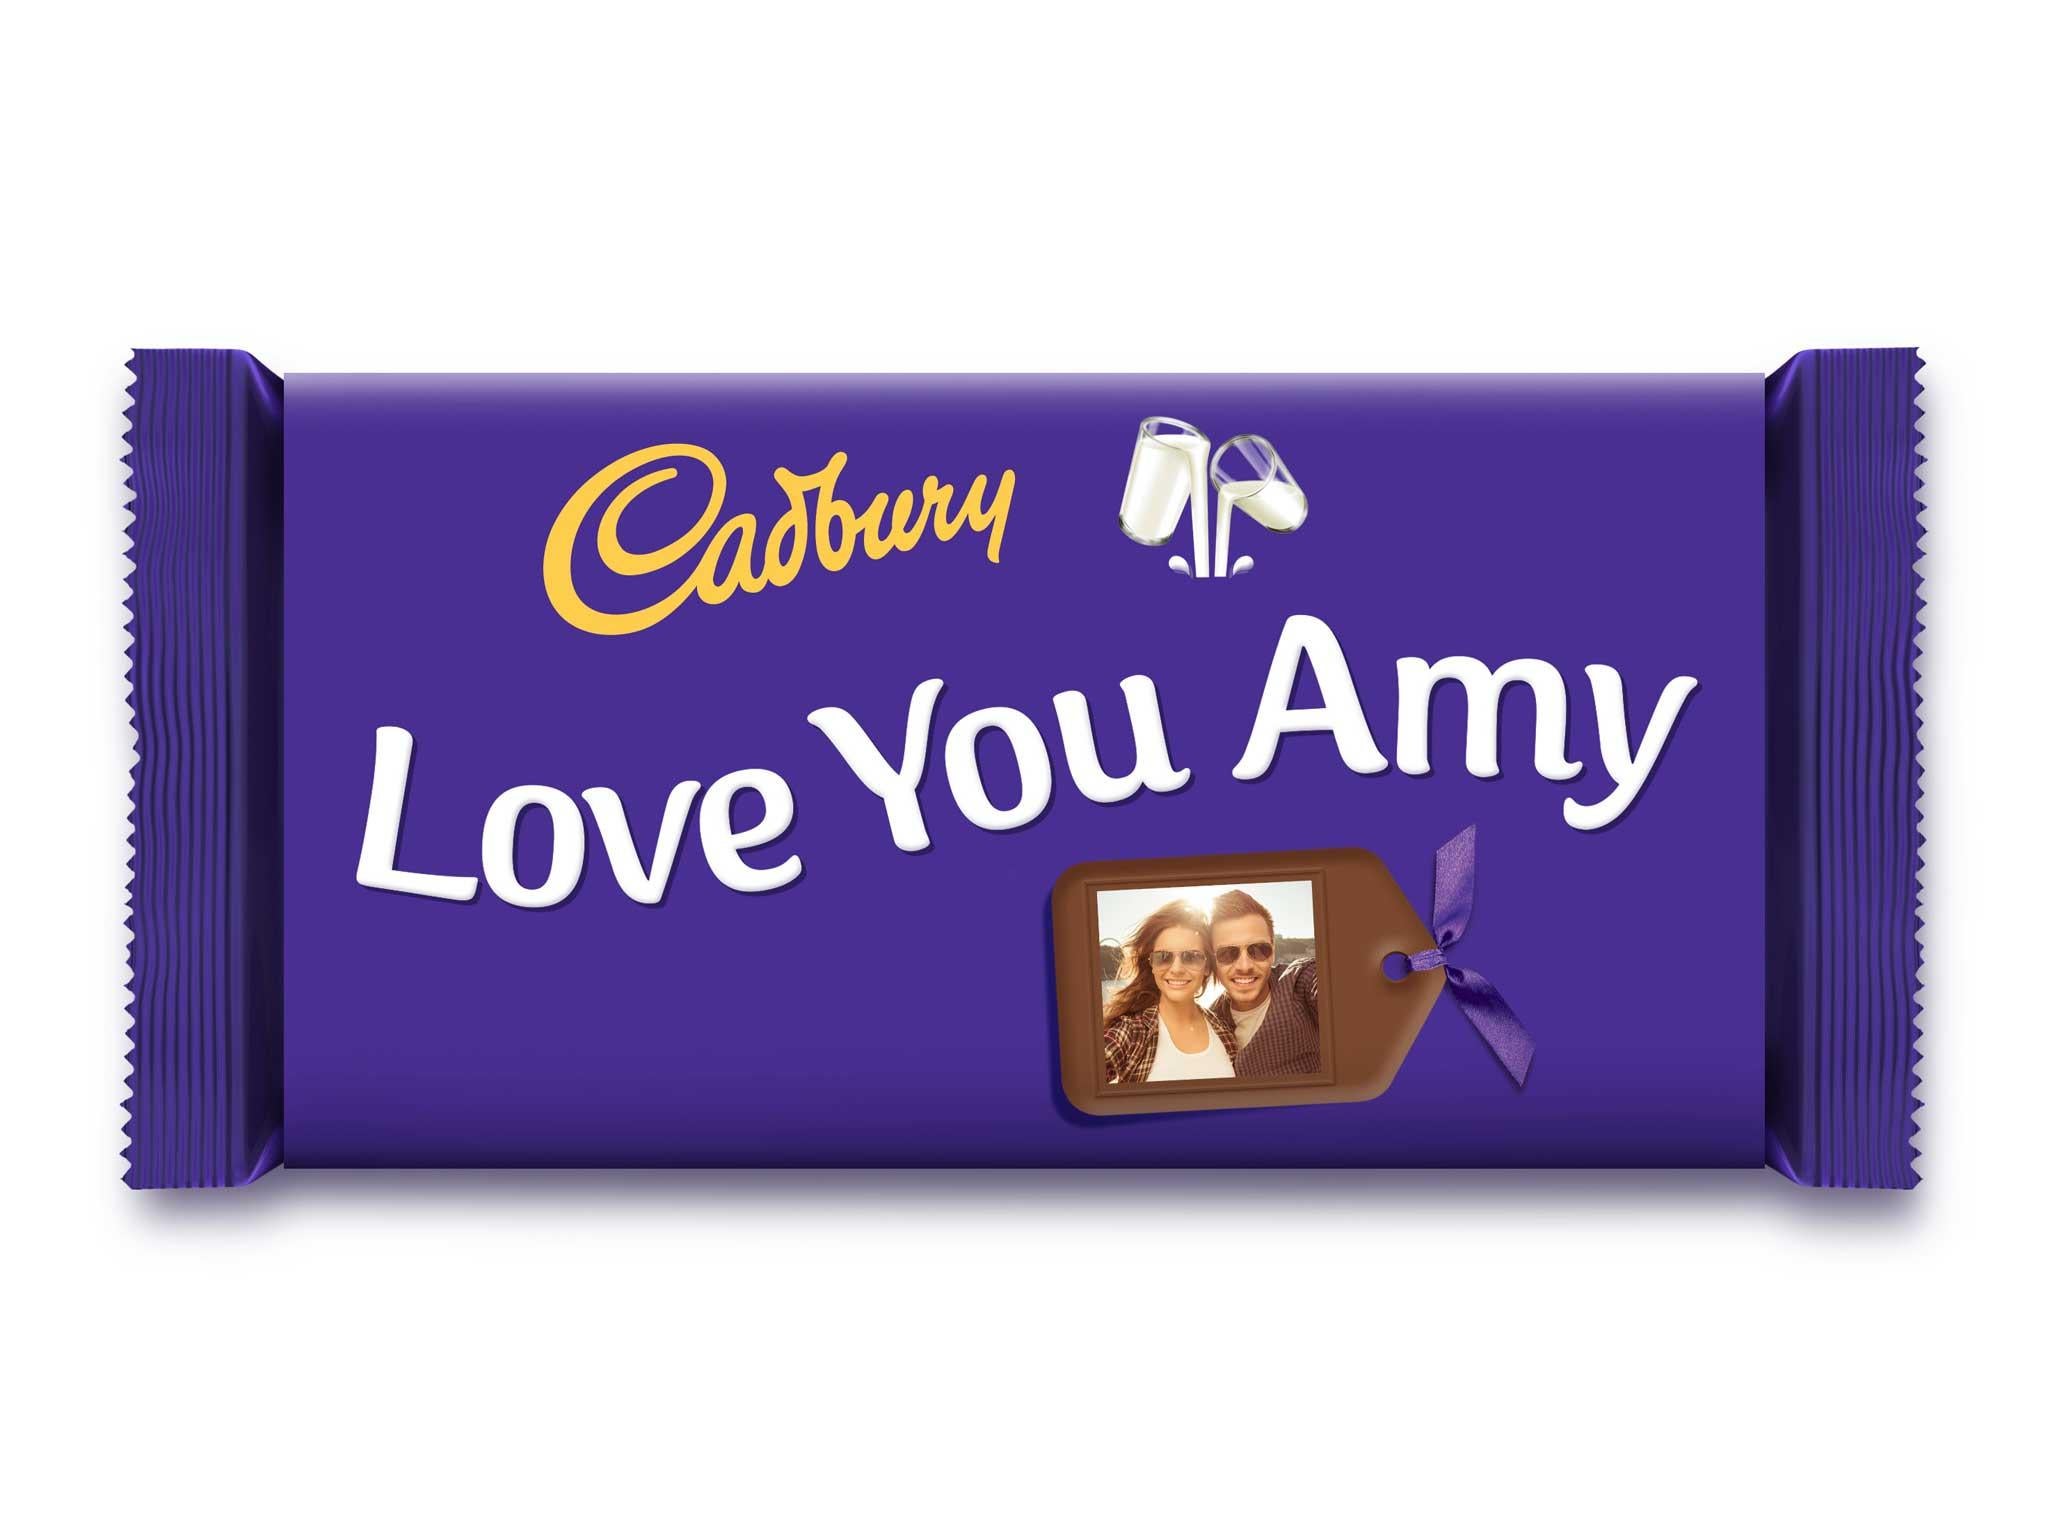 Archived Reviews From Amy Seeks New Treats: Cadbury's Yule Logs